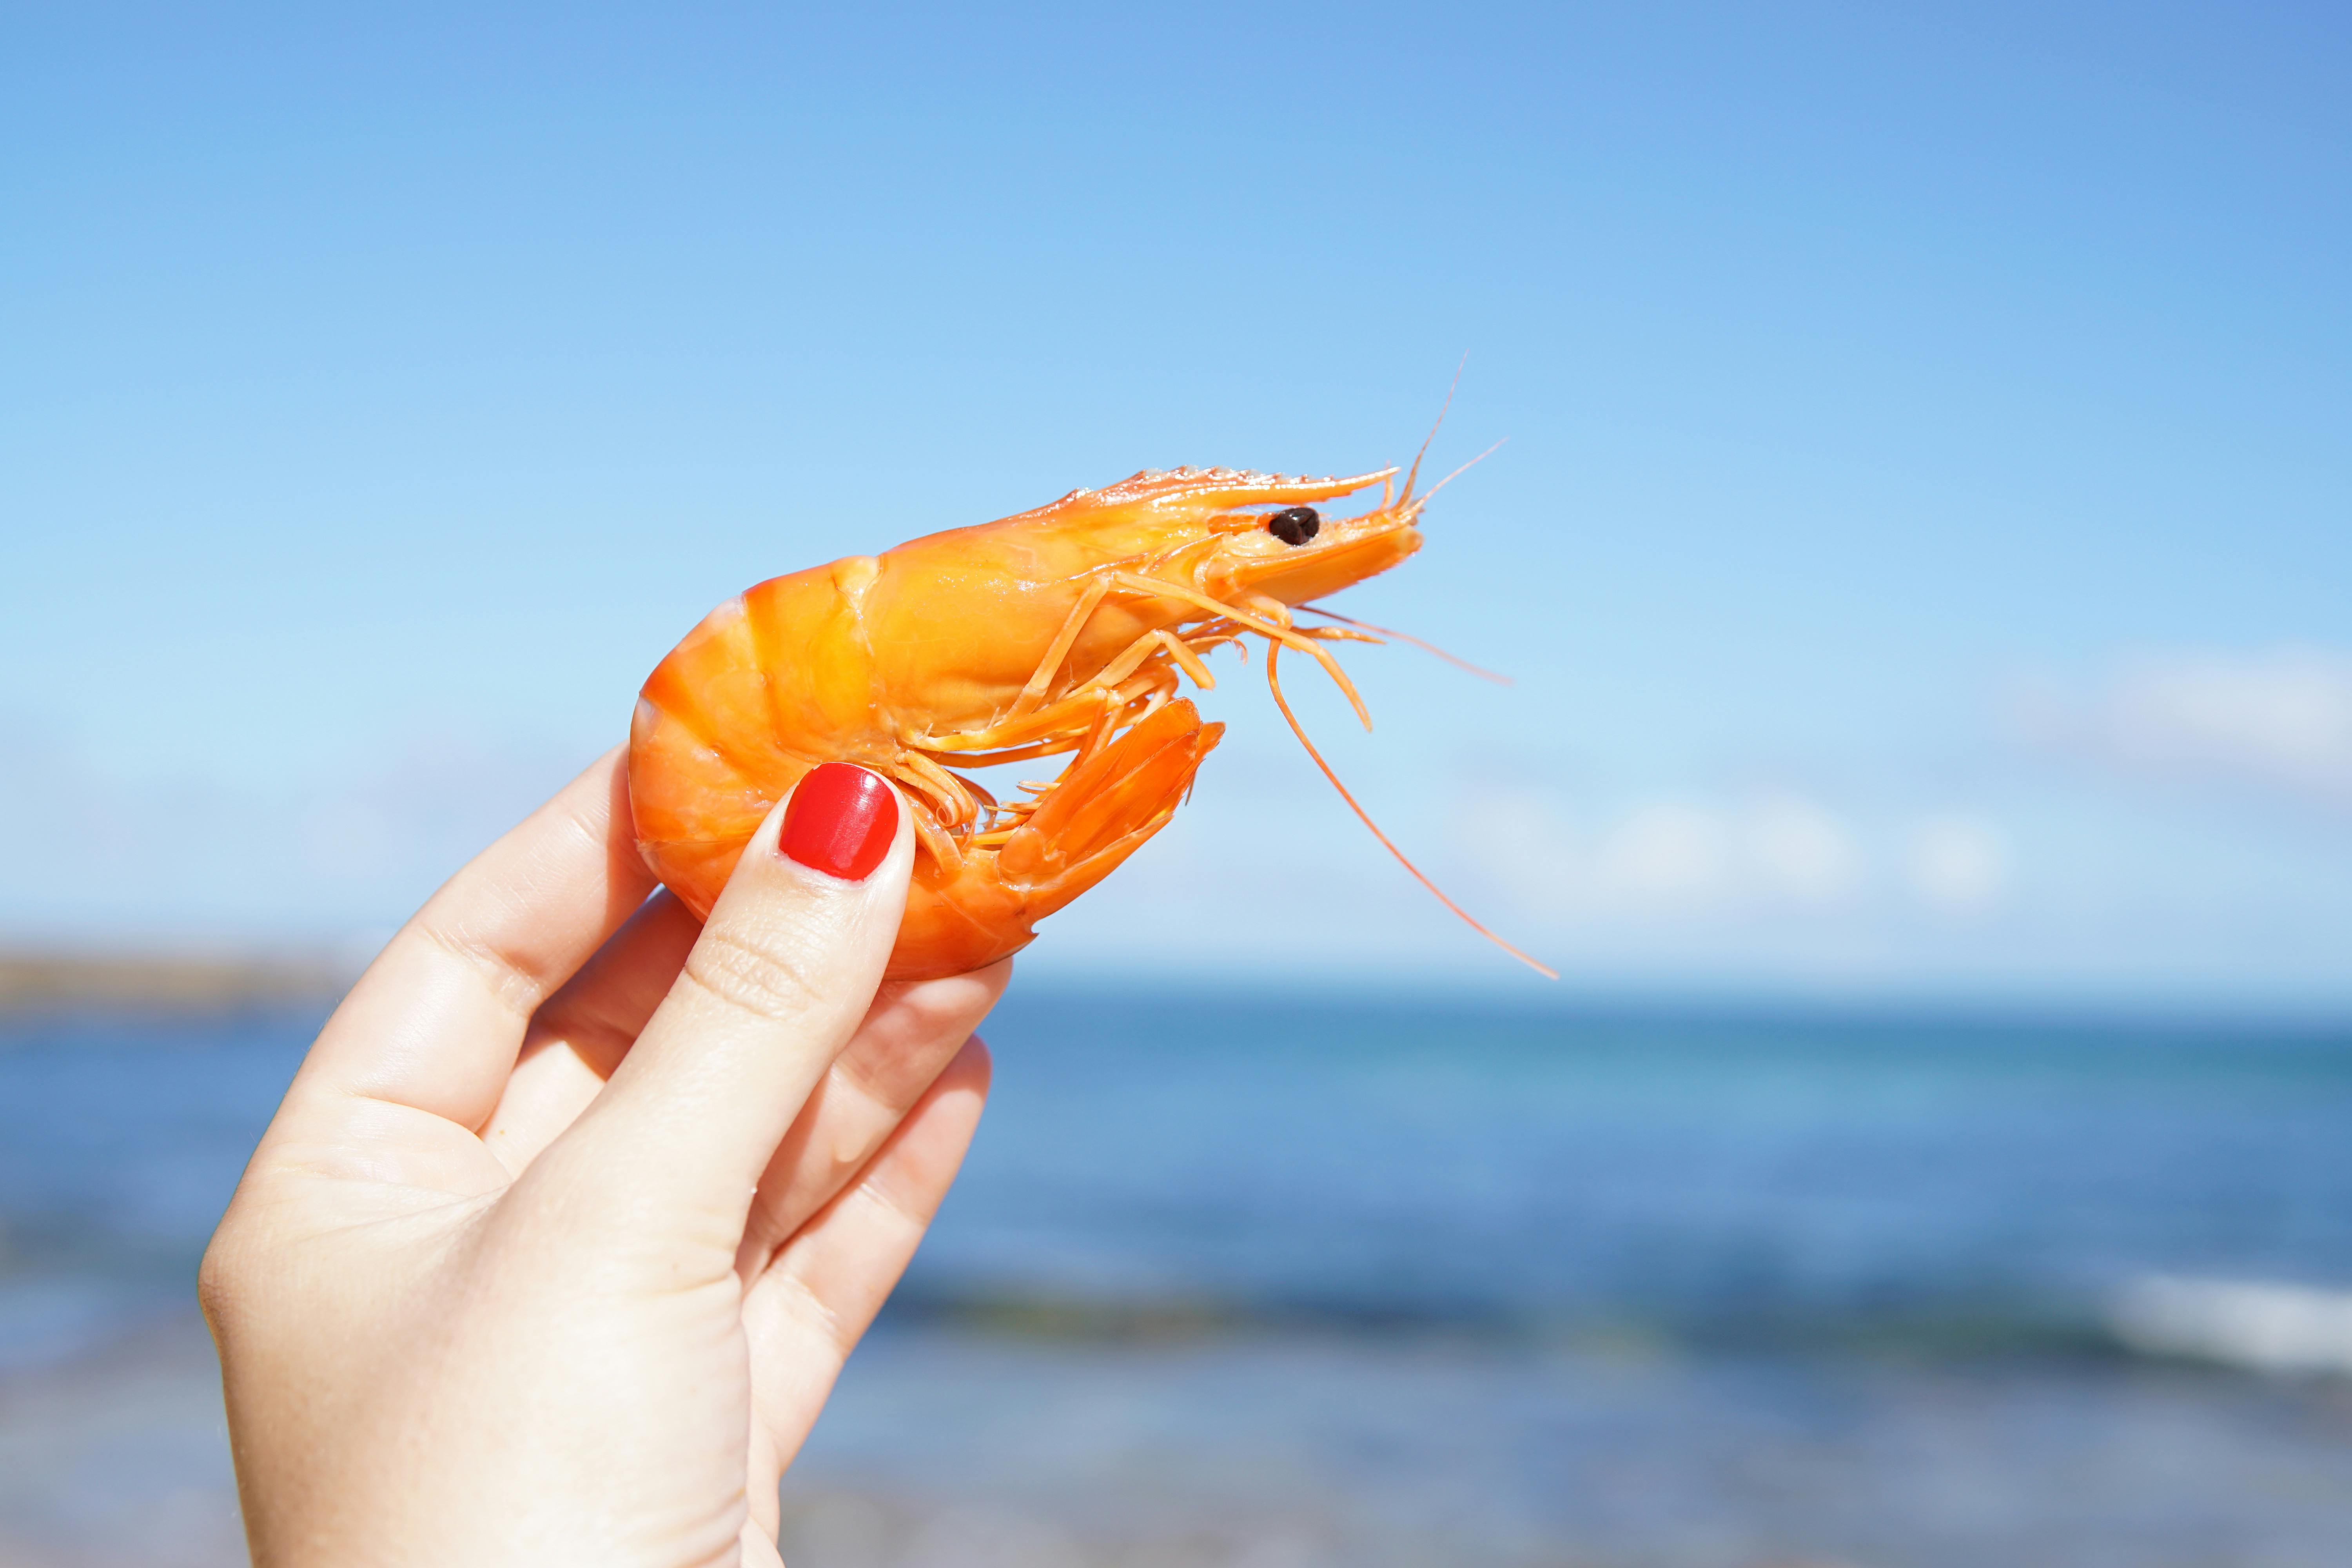 A shrimp being held up in front of the ocean